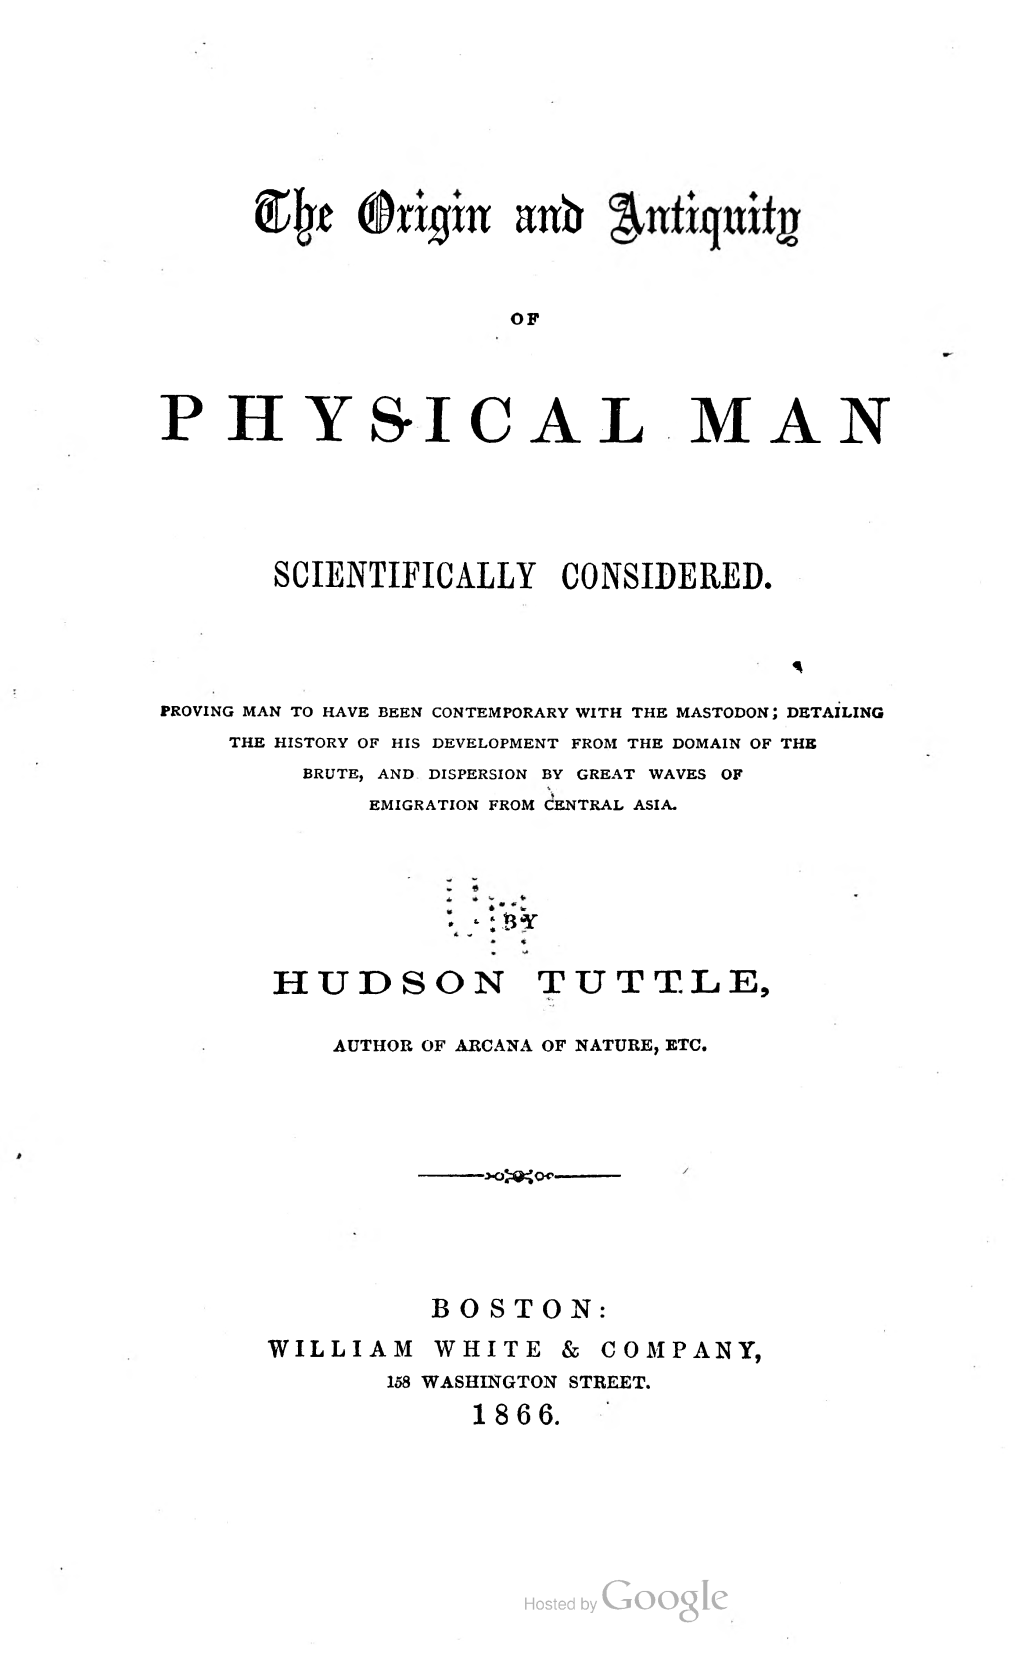 The Origin and Antiquity of Physical Man